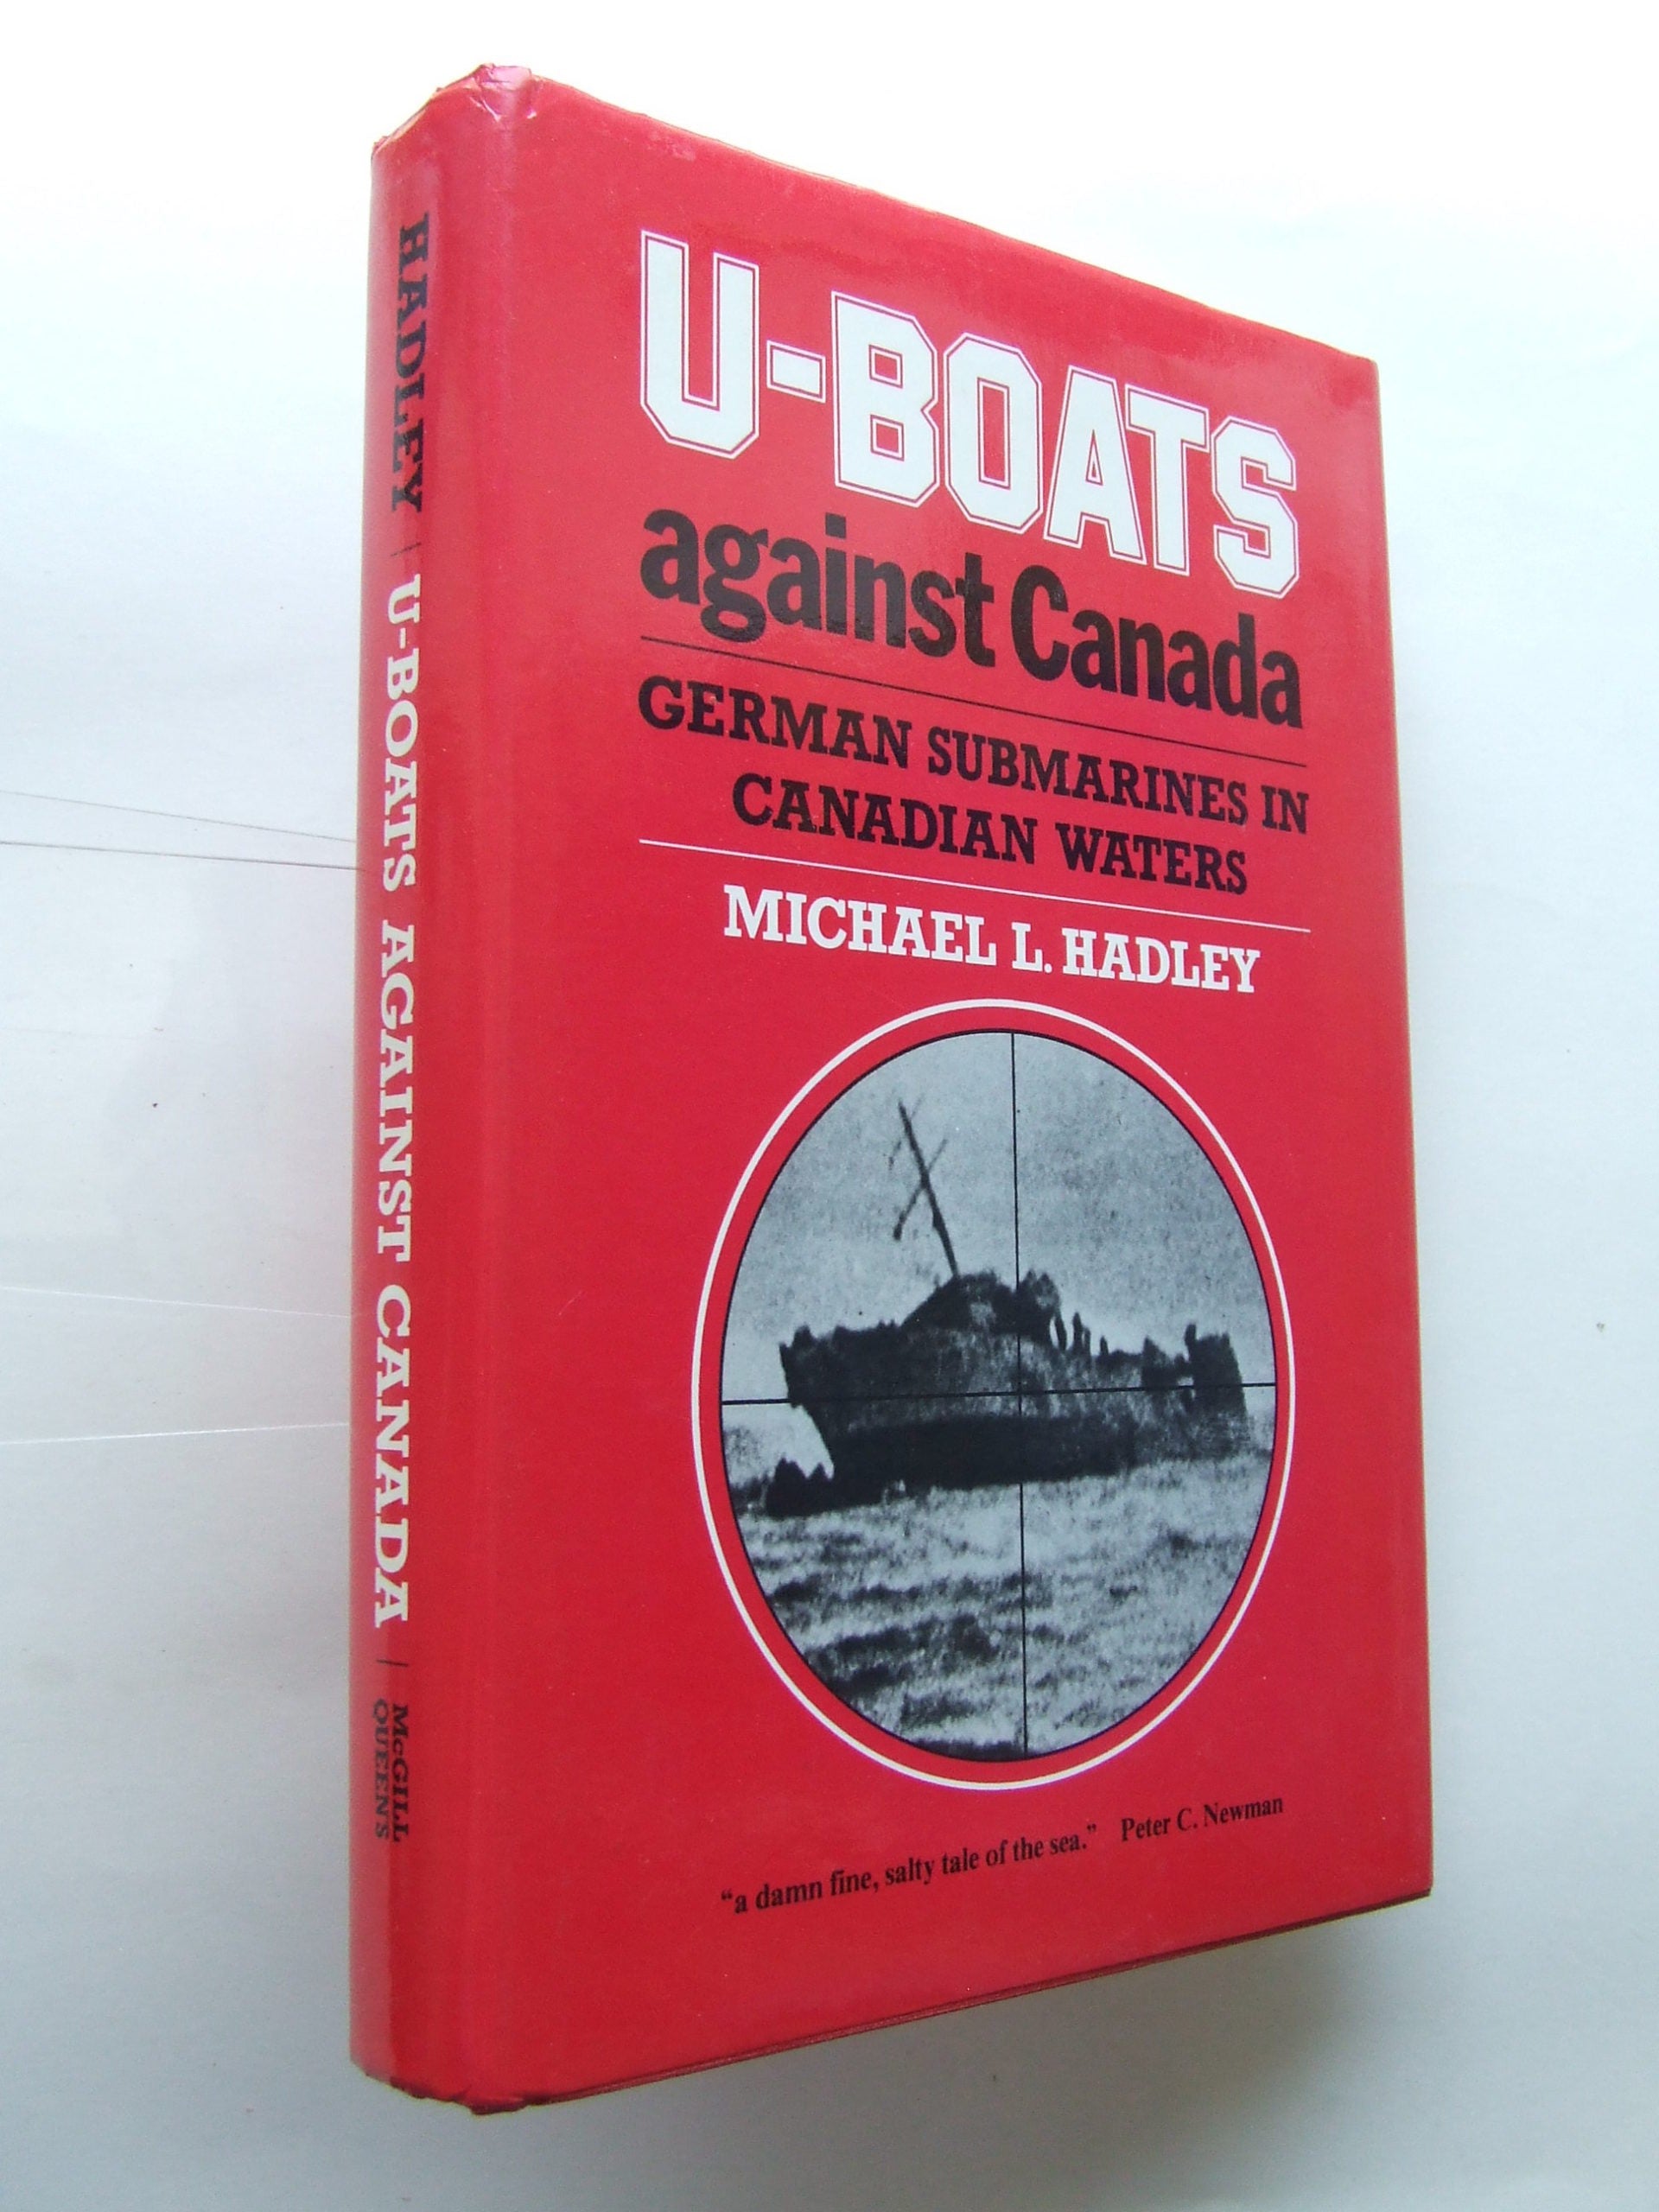 U-Boats against Canada,  German submarines in Canadian waters